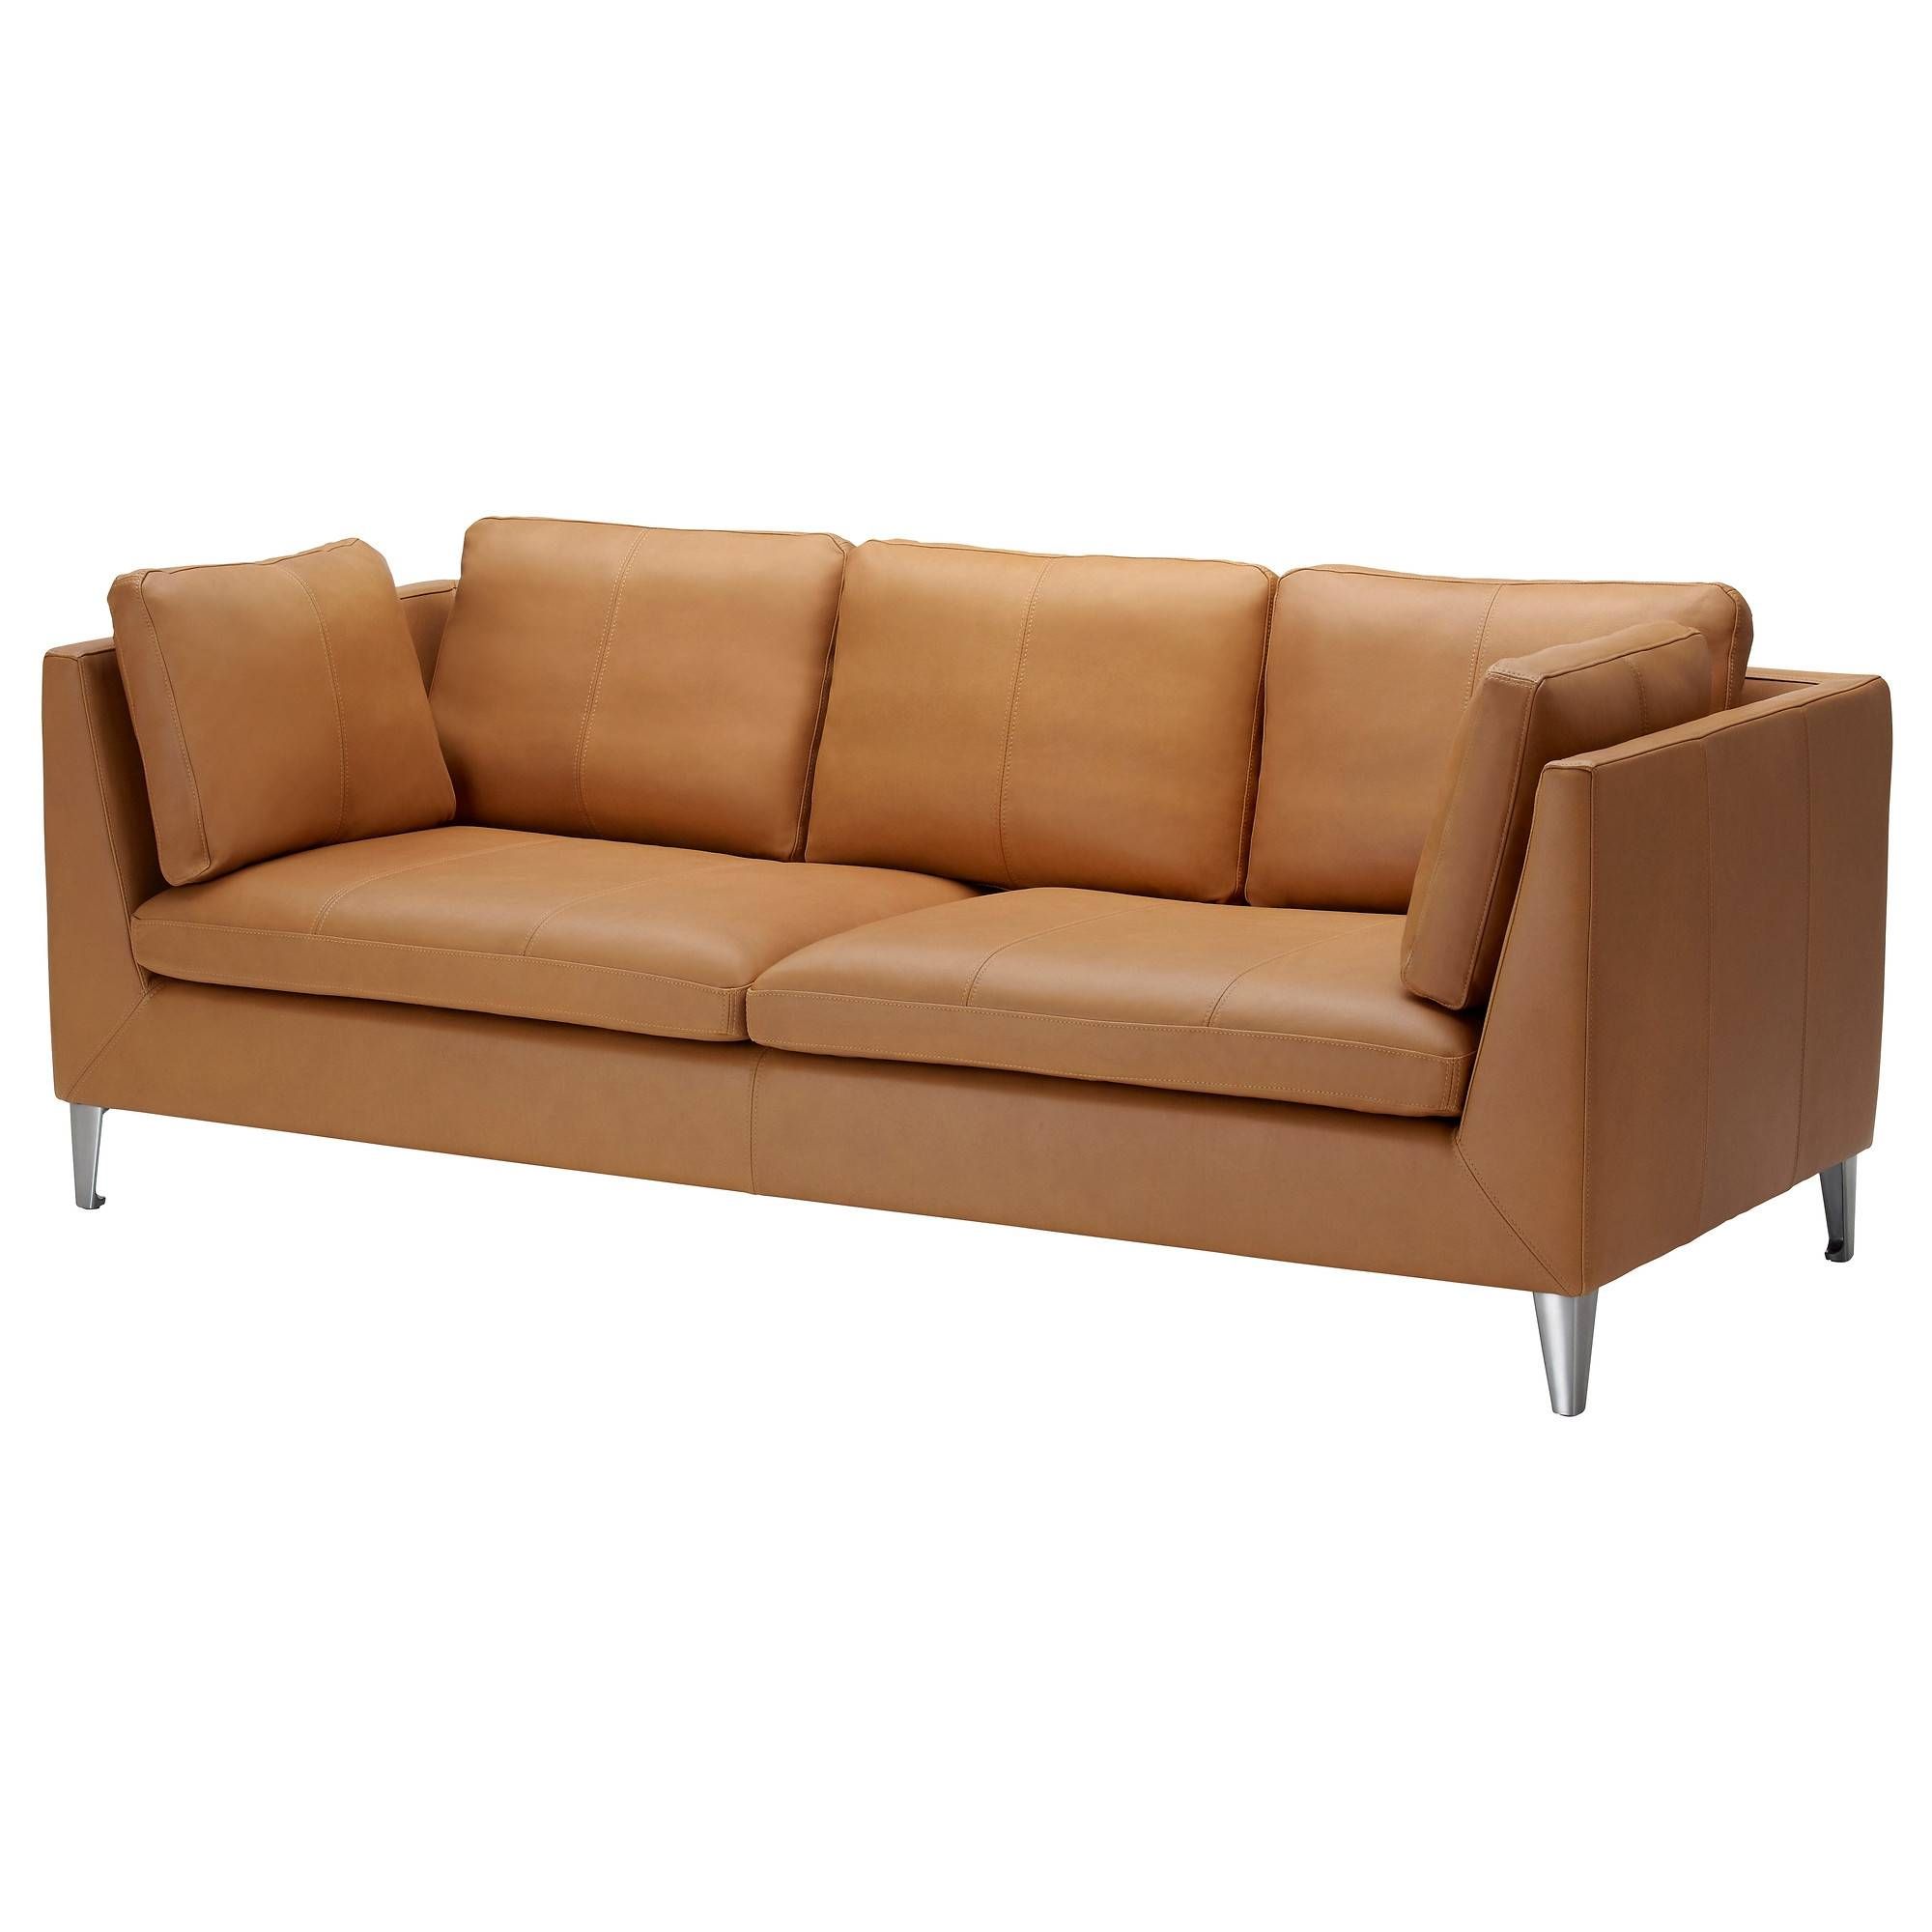 Leather & Faux Leather Couches, Chairs & Ottomans – Ikea Inside Orange Ikea Sofas (View 7 of 30)